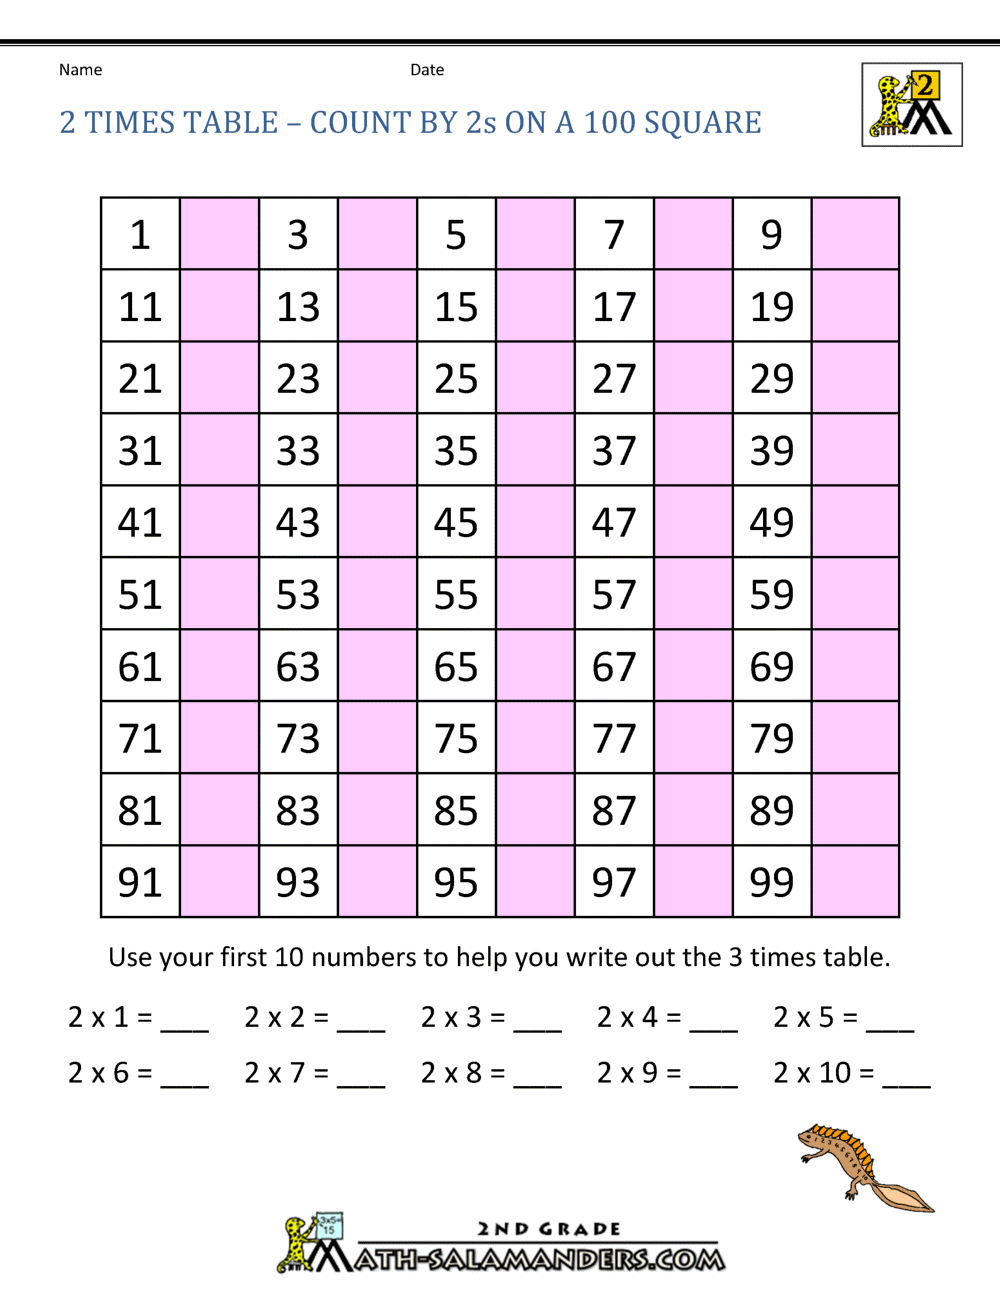 2 times table chart up to 100